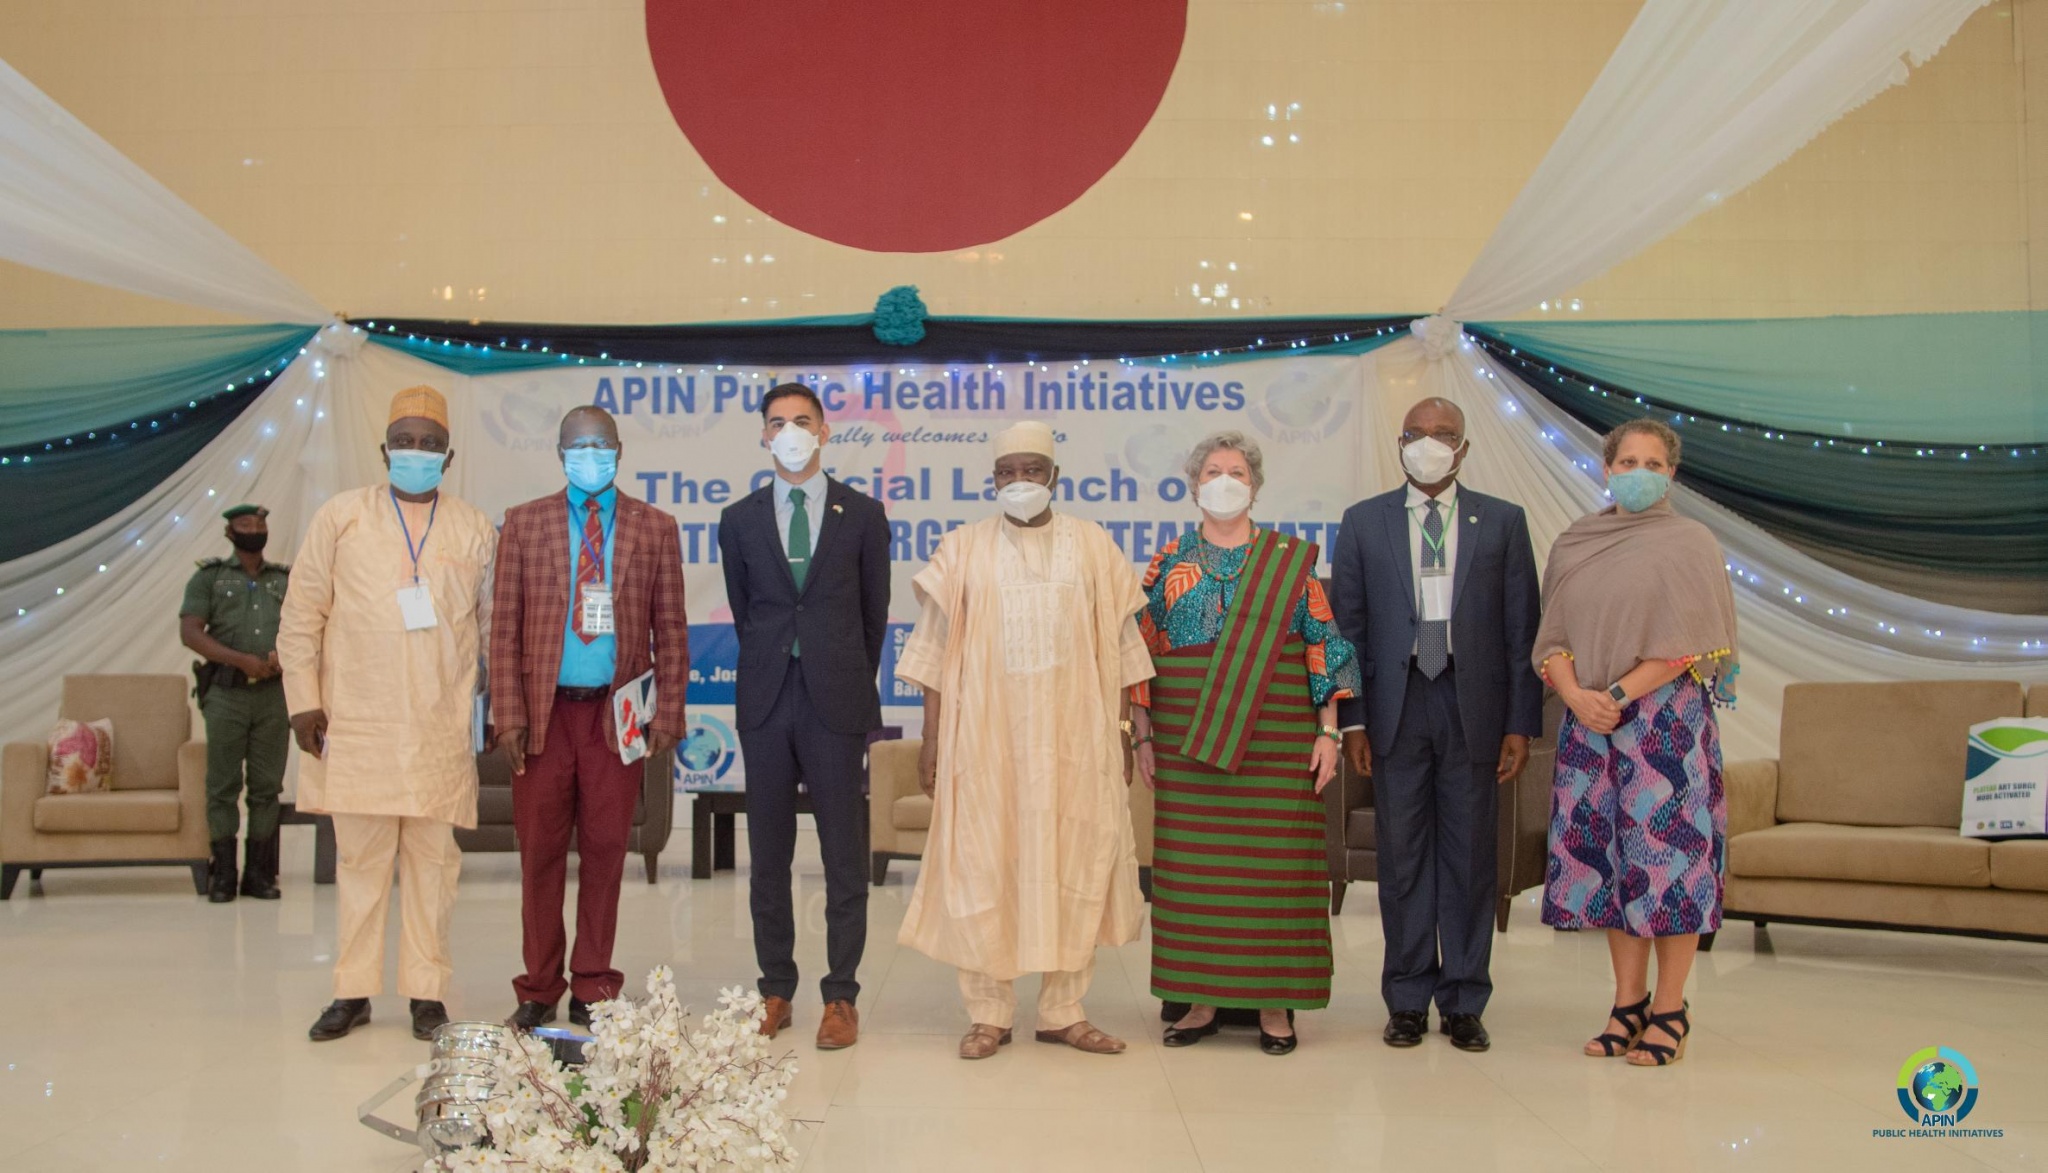 APIN Public Health Initiatives (APIN) and Plateau State Ministry of Health Launch HIV Treatment Surge